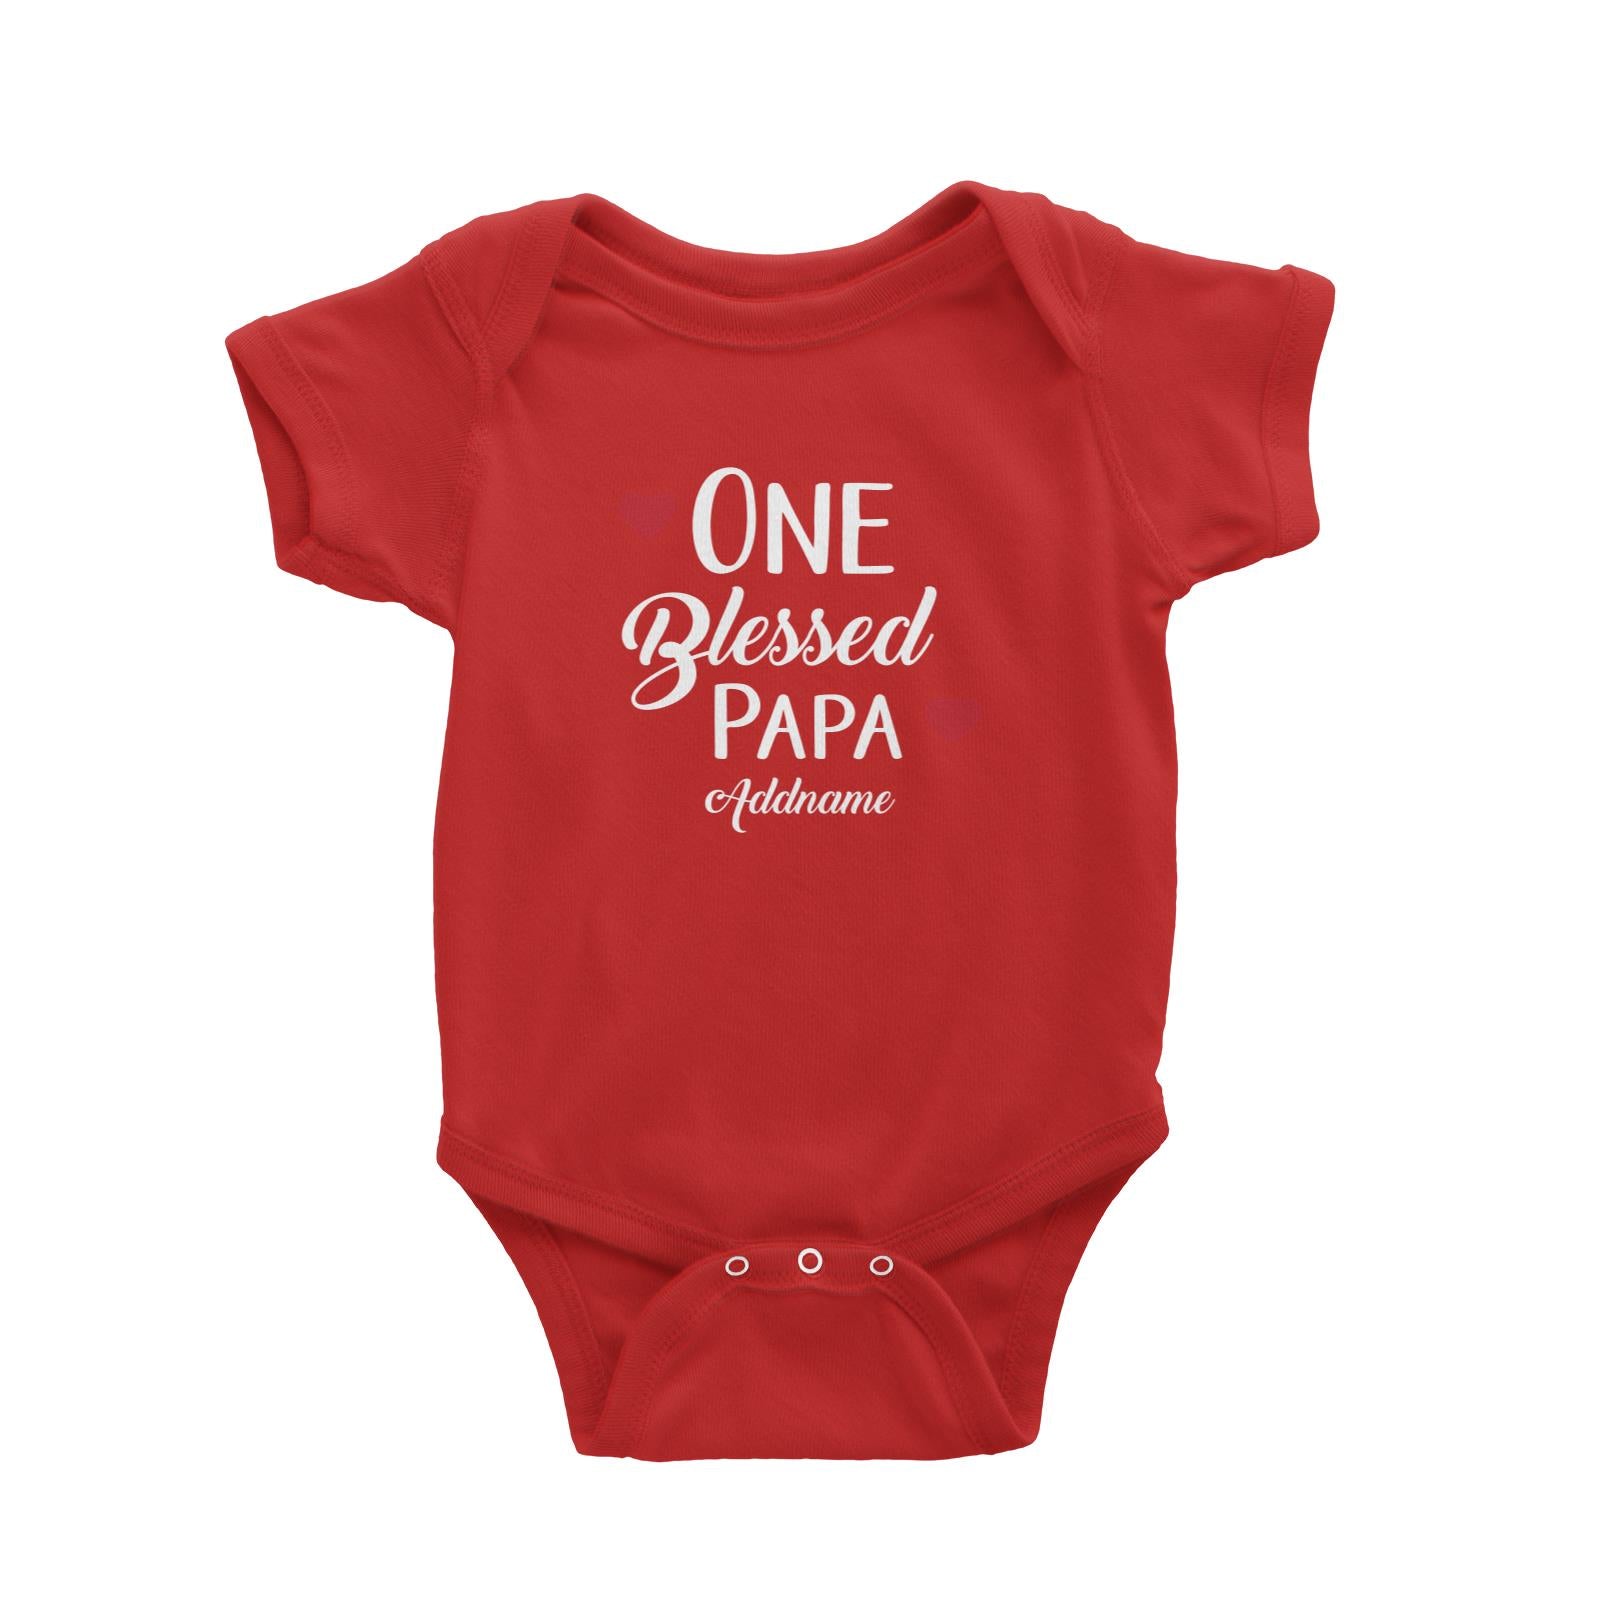 Christian Series One Blessed Papa Addname Baby Romper